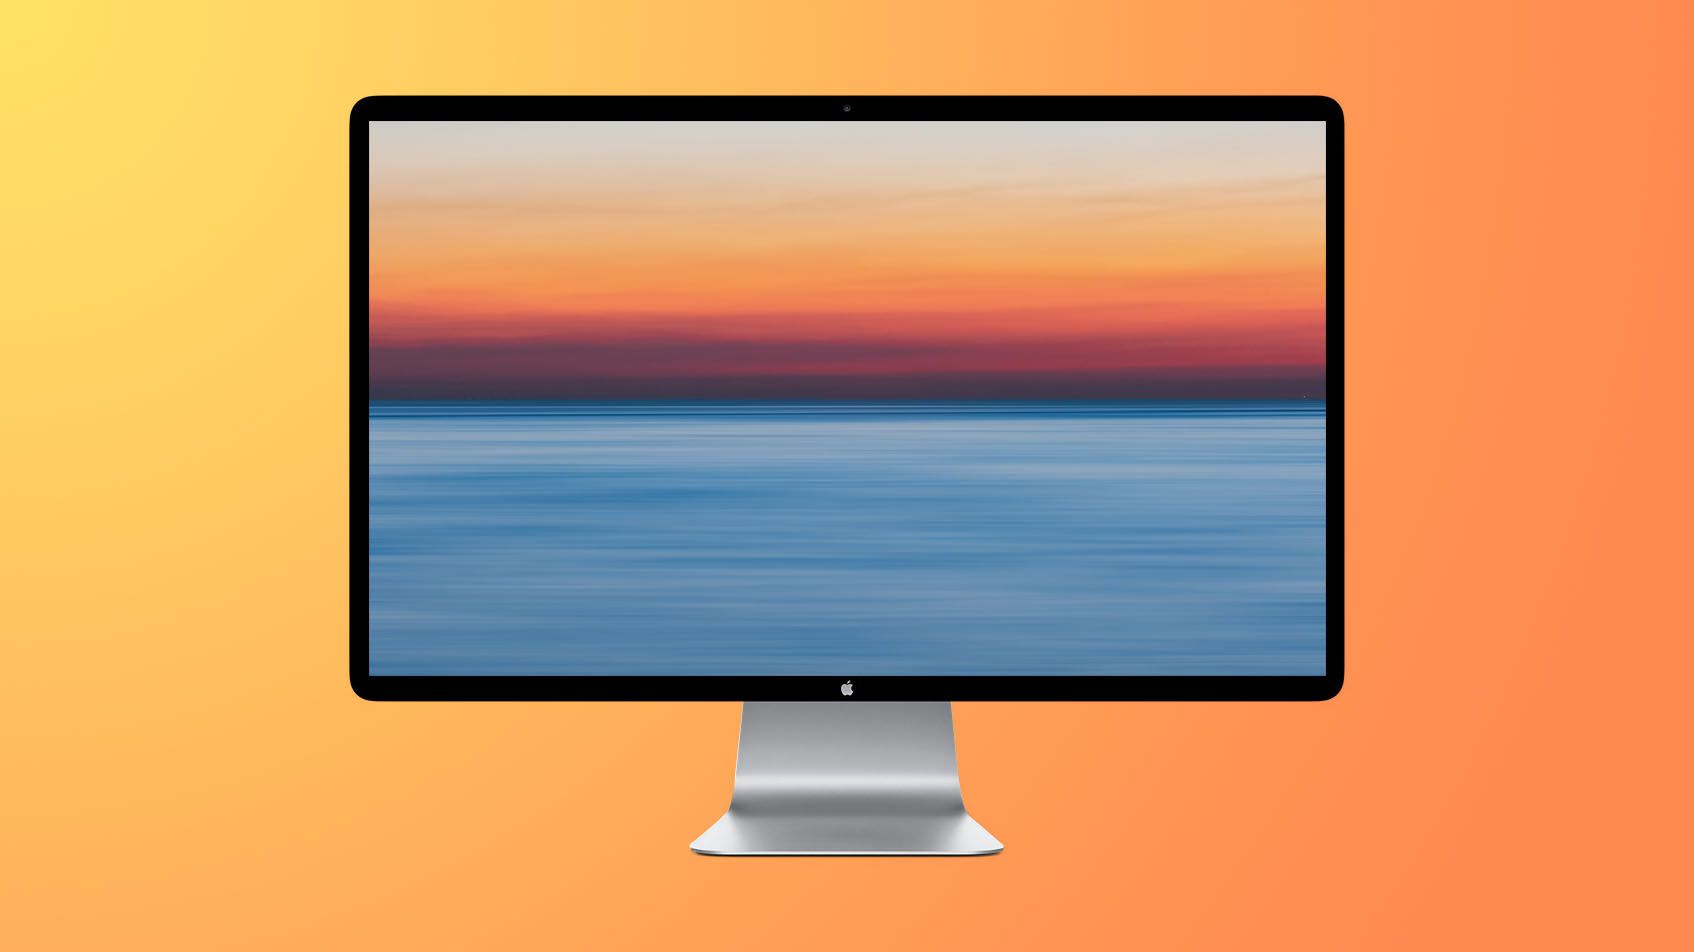 Apple said it is working on a cheaper external monitor to pass Thunderbolt screen